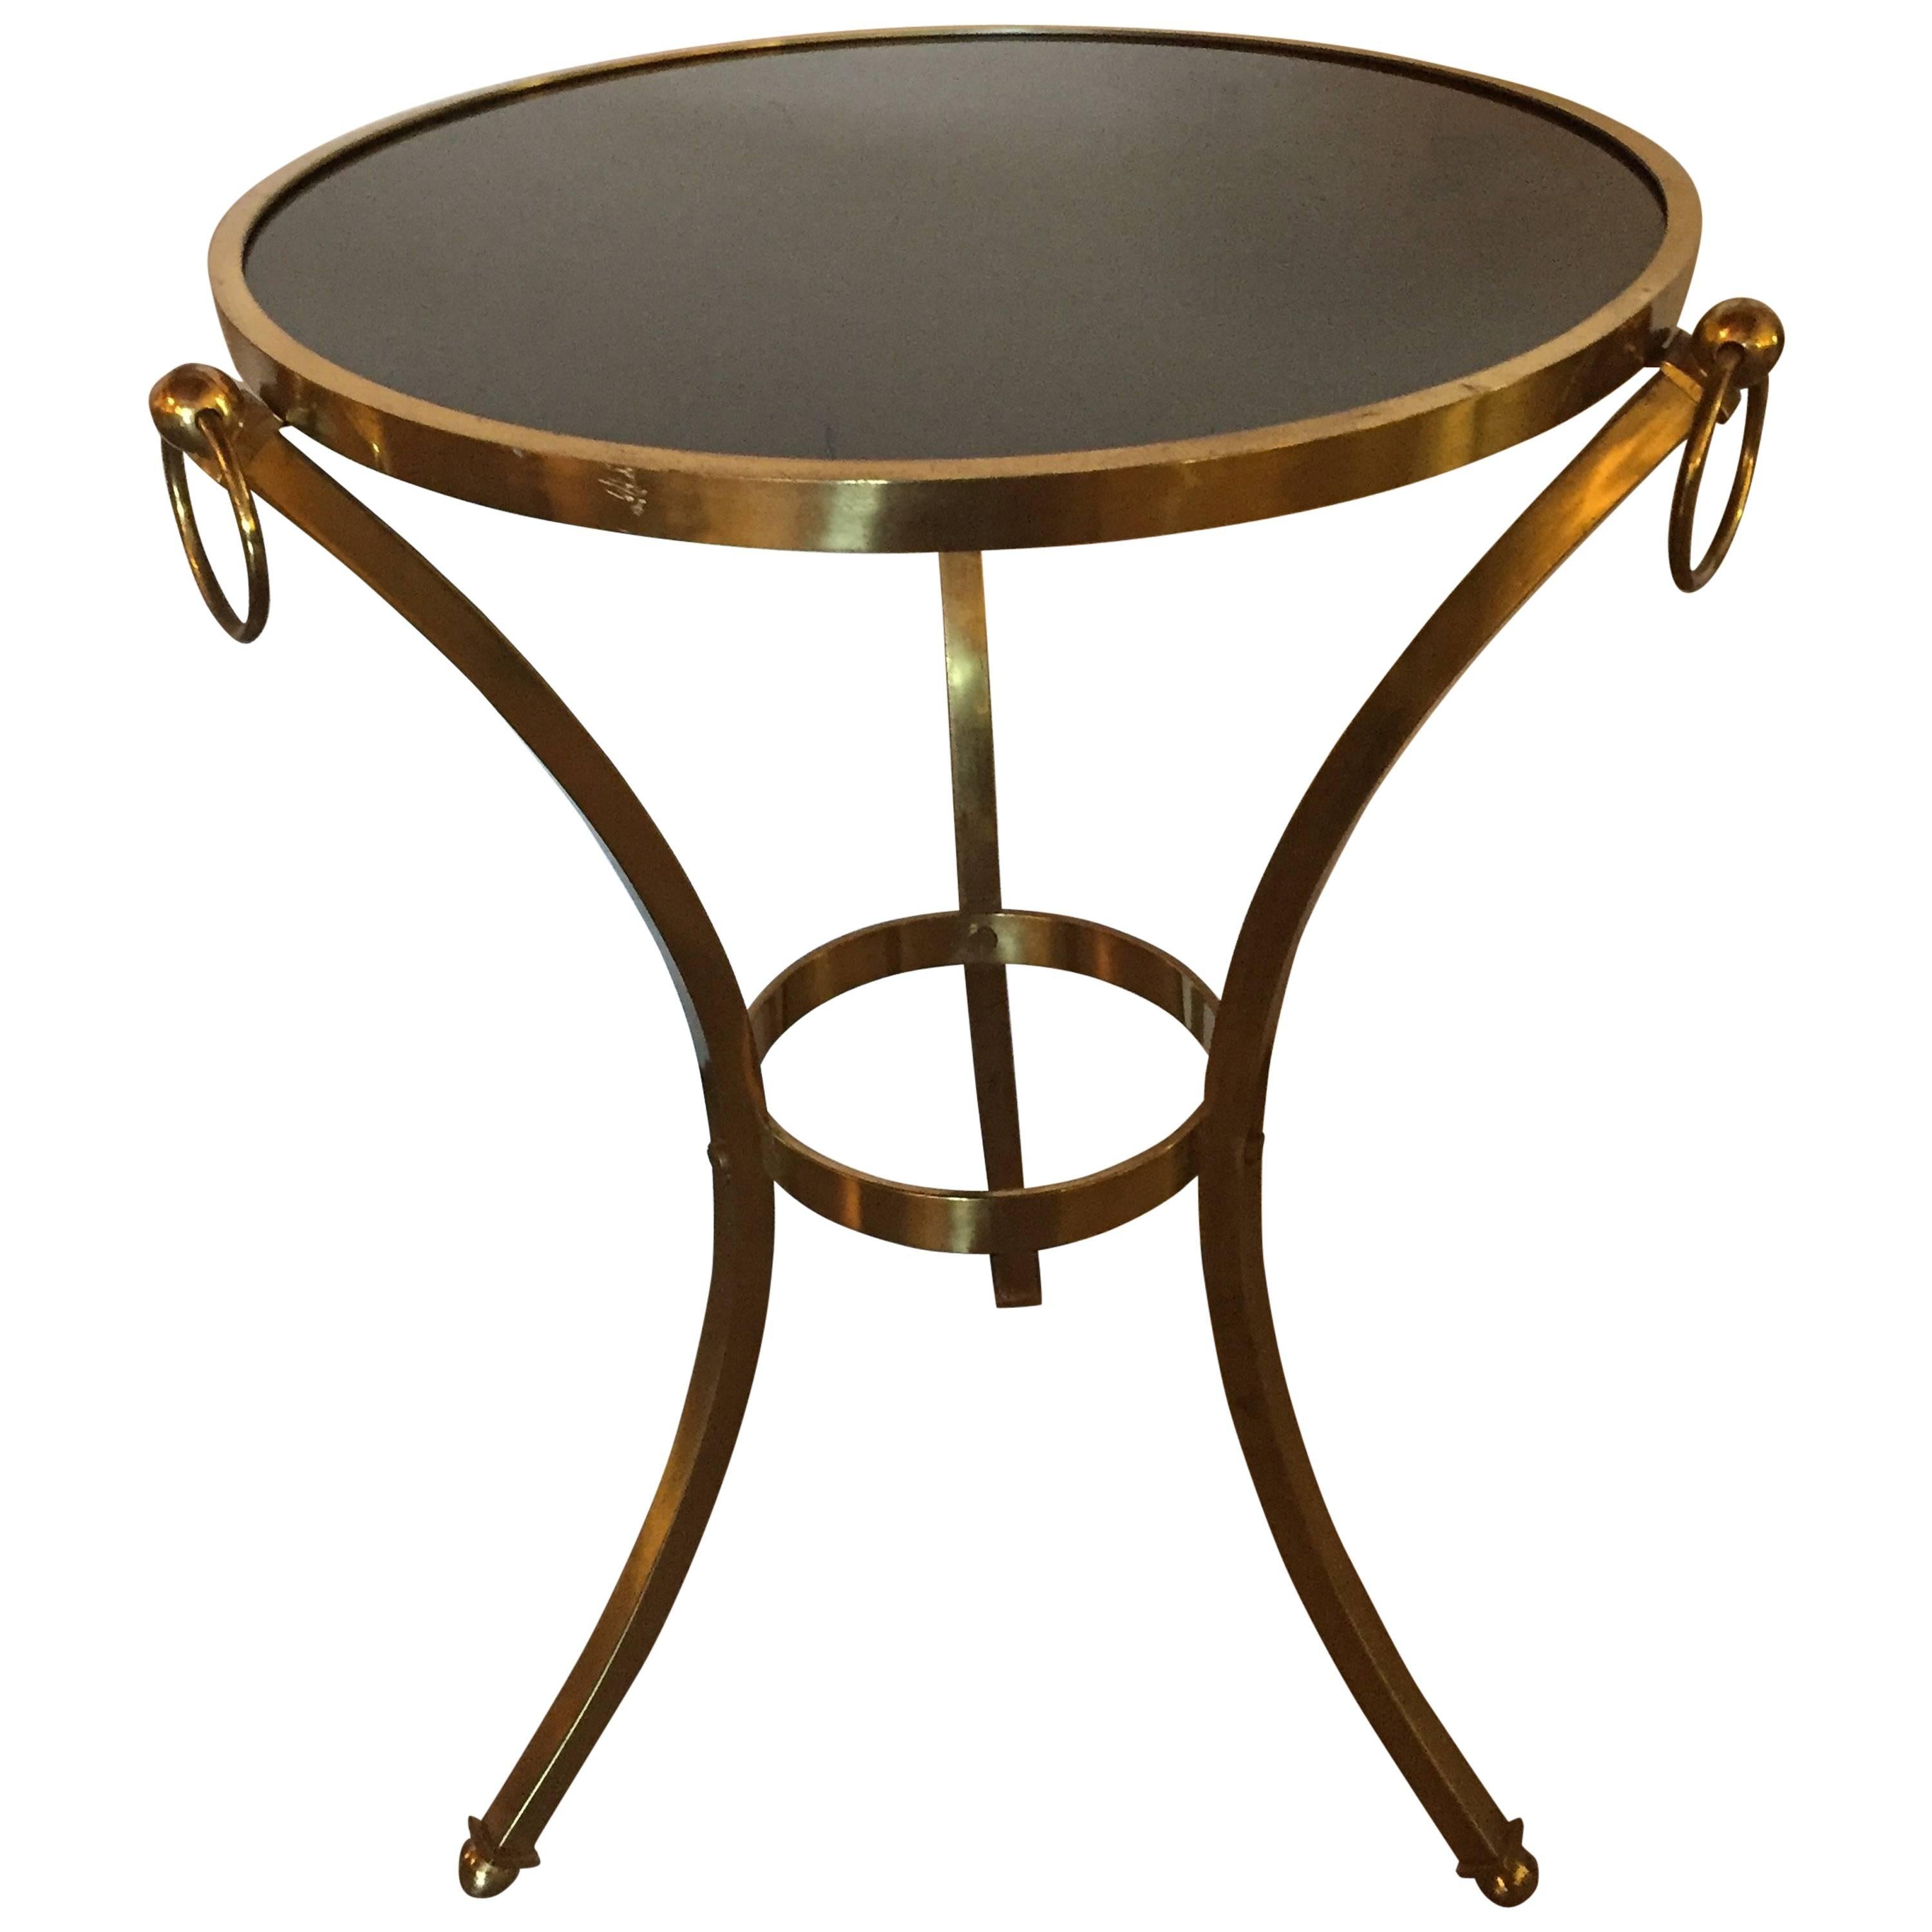 Small Brass Hollywood Regency Gueridon Table with Glass Top